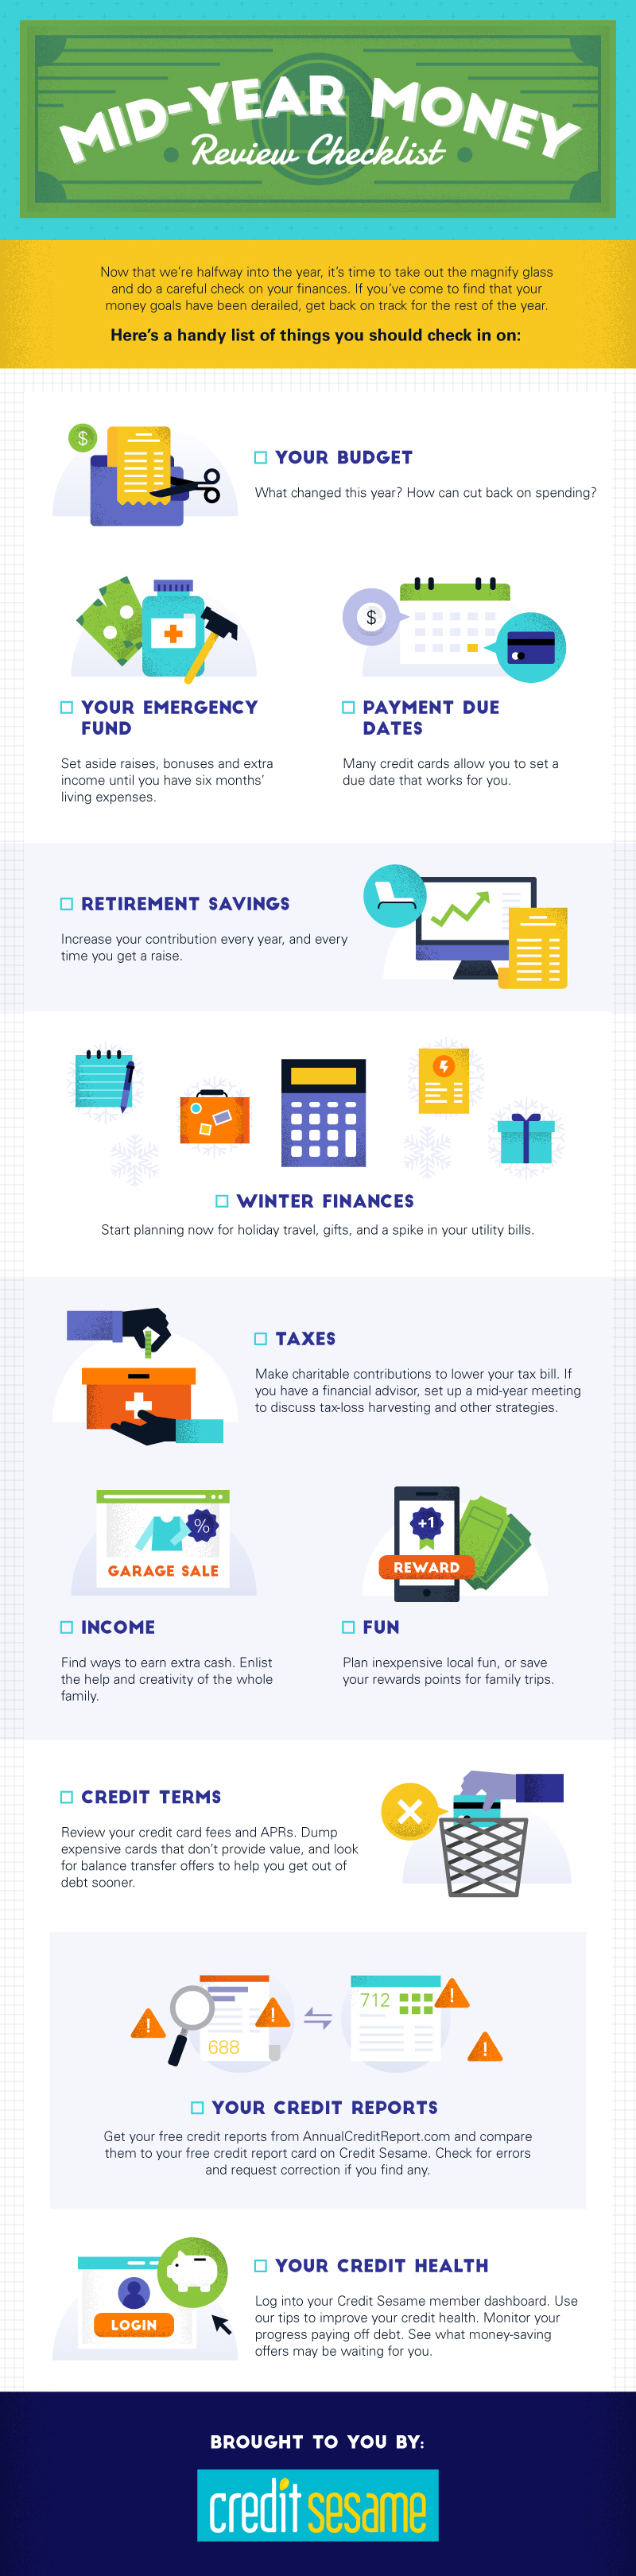 Infographic for Mid-Year Money Review Checklist